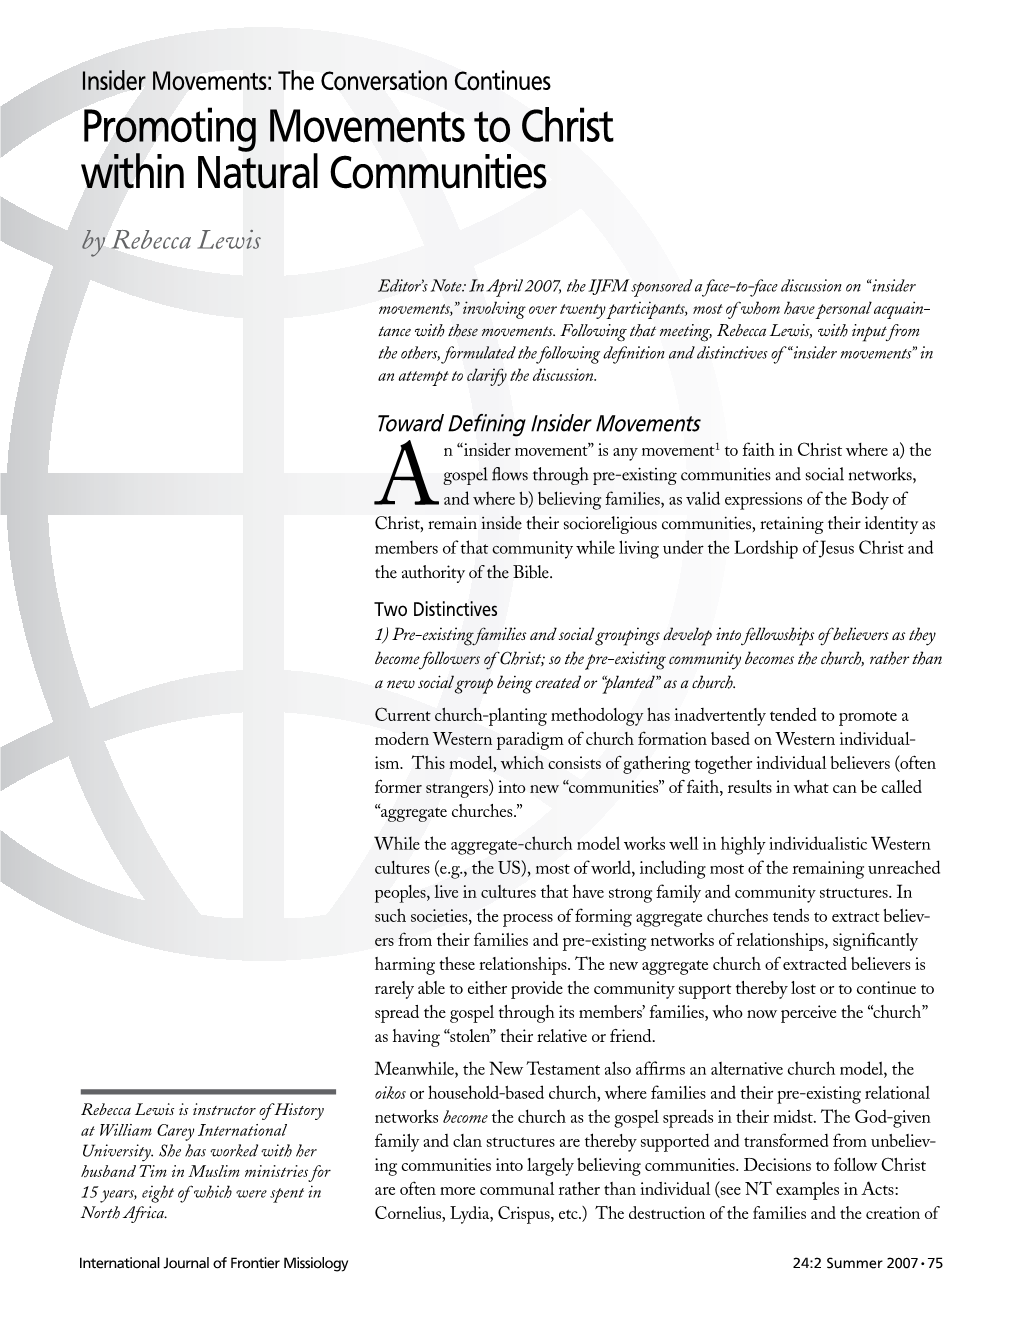 Promoting Movements to Christ Within Natural Communities by Rebecca Lewis